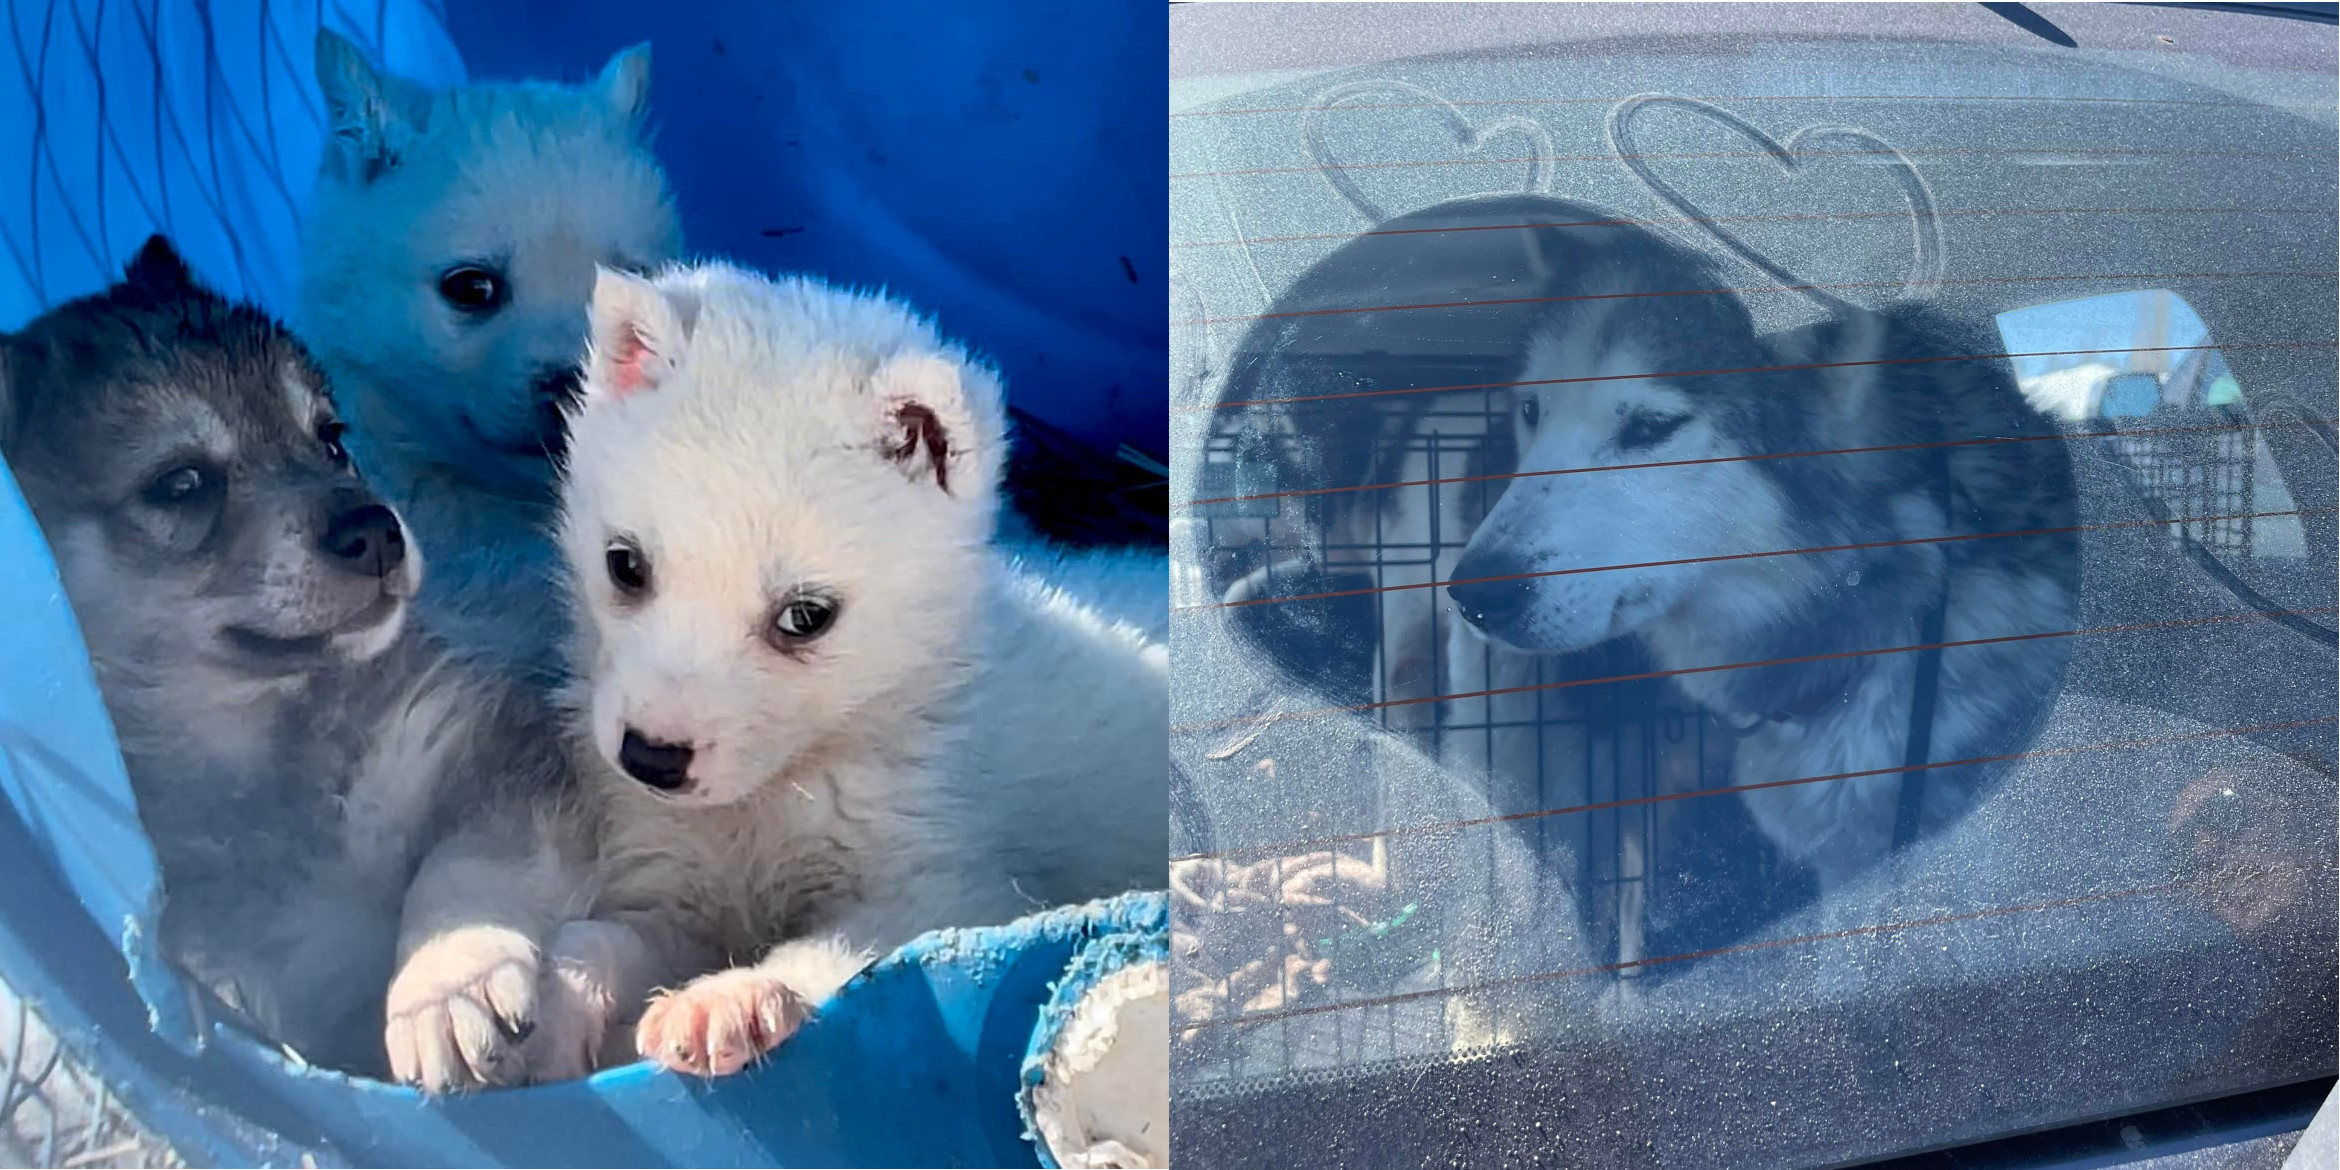 Image shows dogs rescued from dog sledding operation